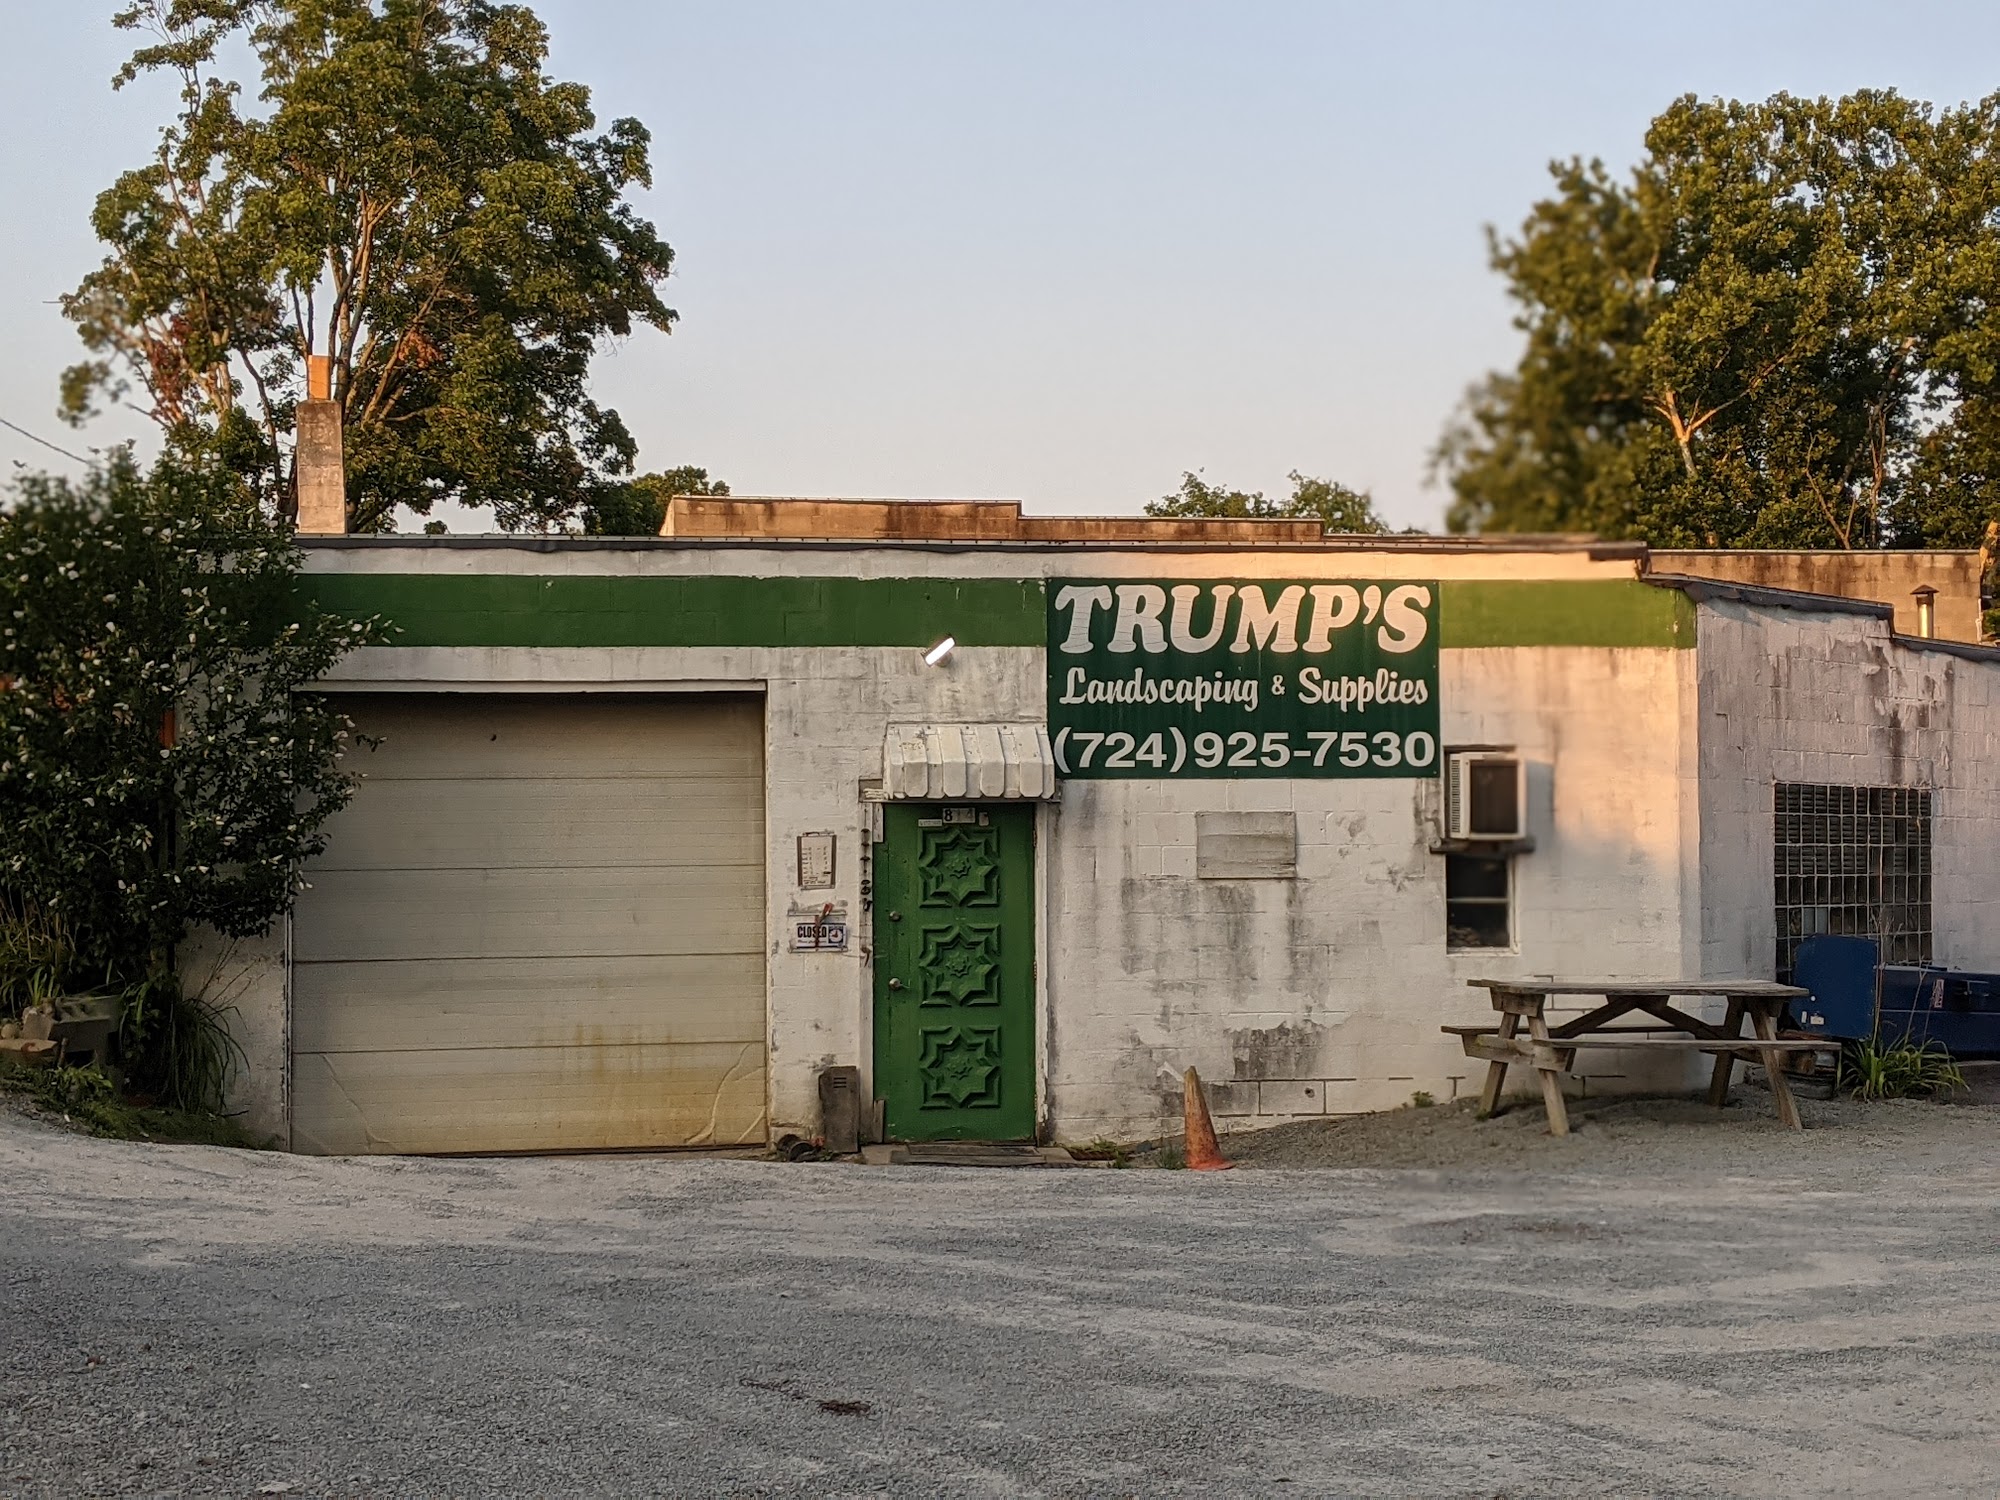 Trump's Landscaping, LLC 814 S 4th St, Youngwood Pennsylvania 15697